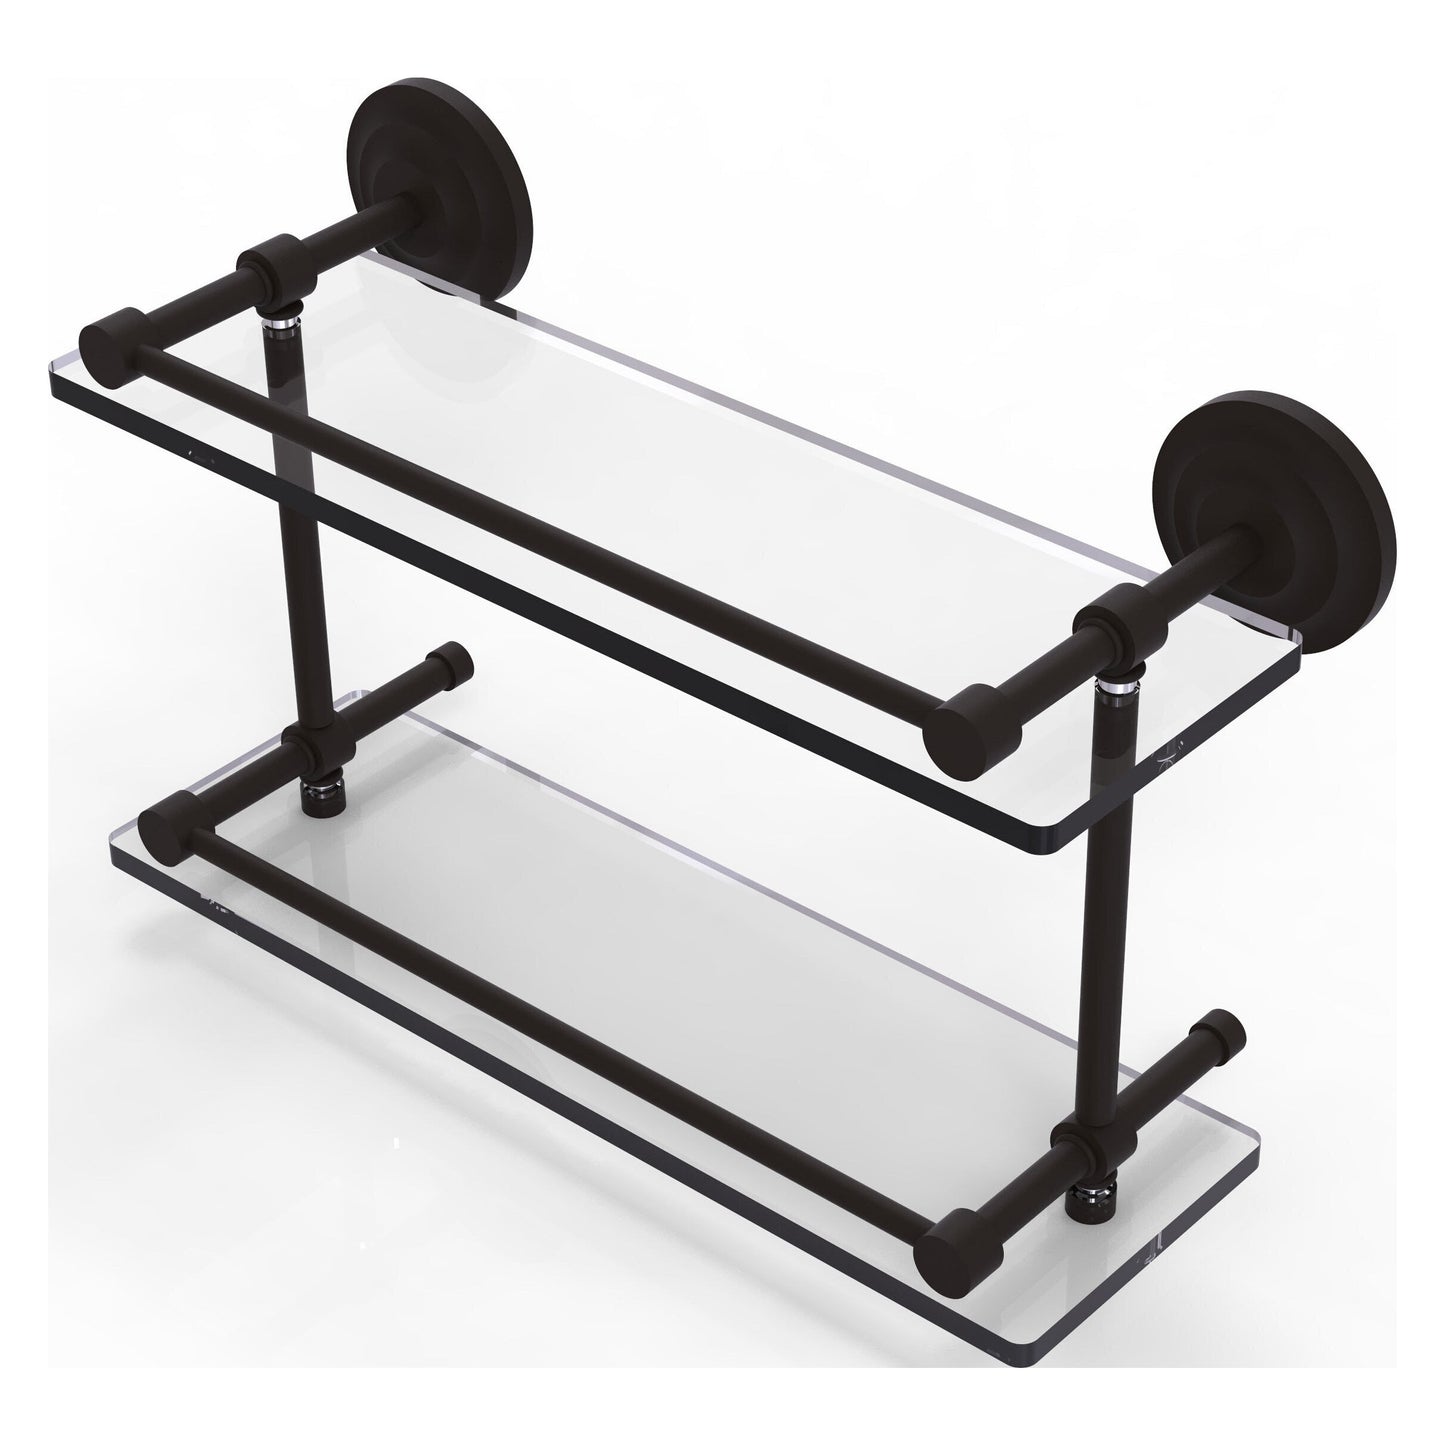 Allied Brass Que New 16" x 5" Oil Rubbed Bronze Solid Brass 16-Inch Double Glass Shelf With Gallery Rail